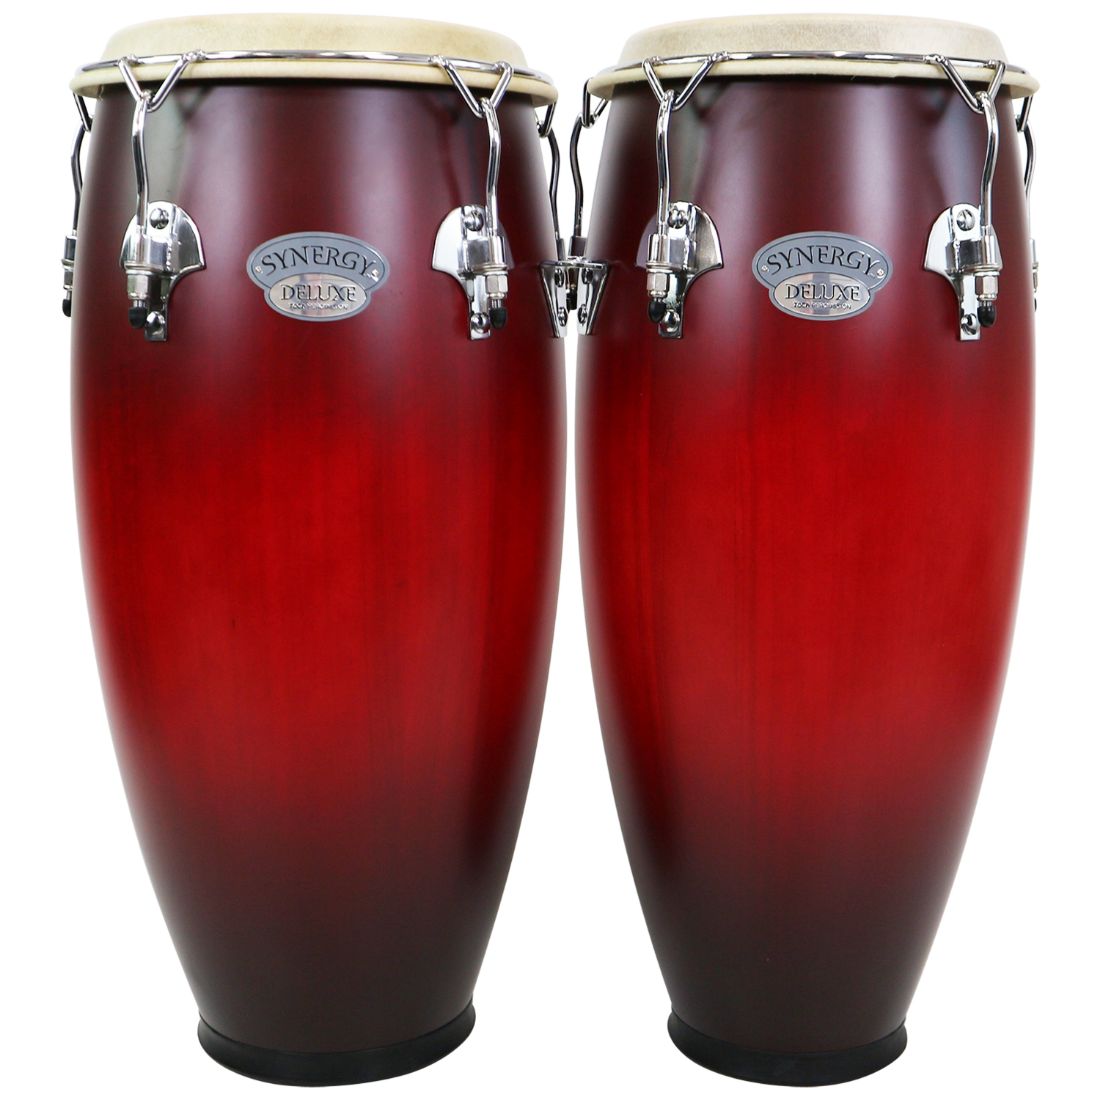 Toca Synergy Deluxe Conga Set Matte Wine Burst w/Basket Stands